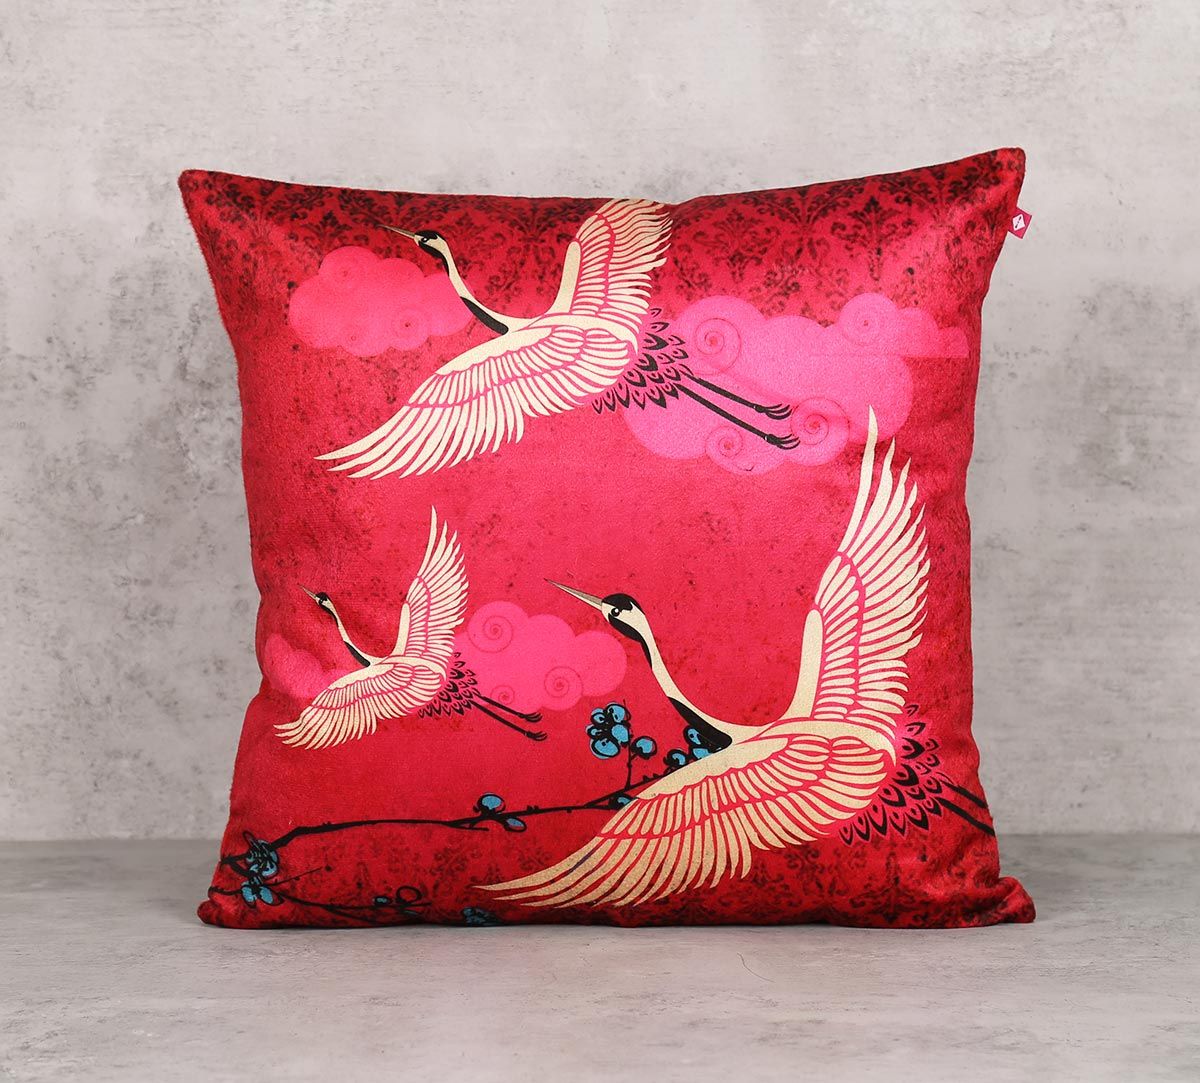 India Circus Legend Of The Cranes Blend Velvet 16 x 16 Cushion Cover